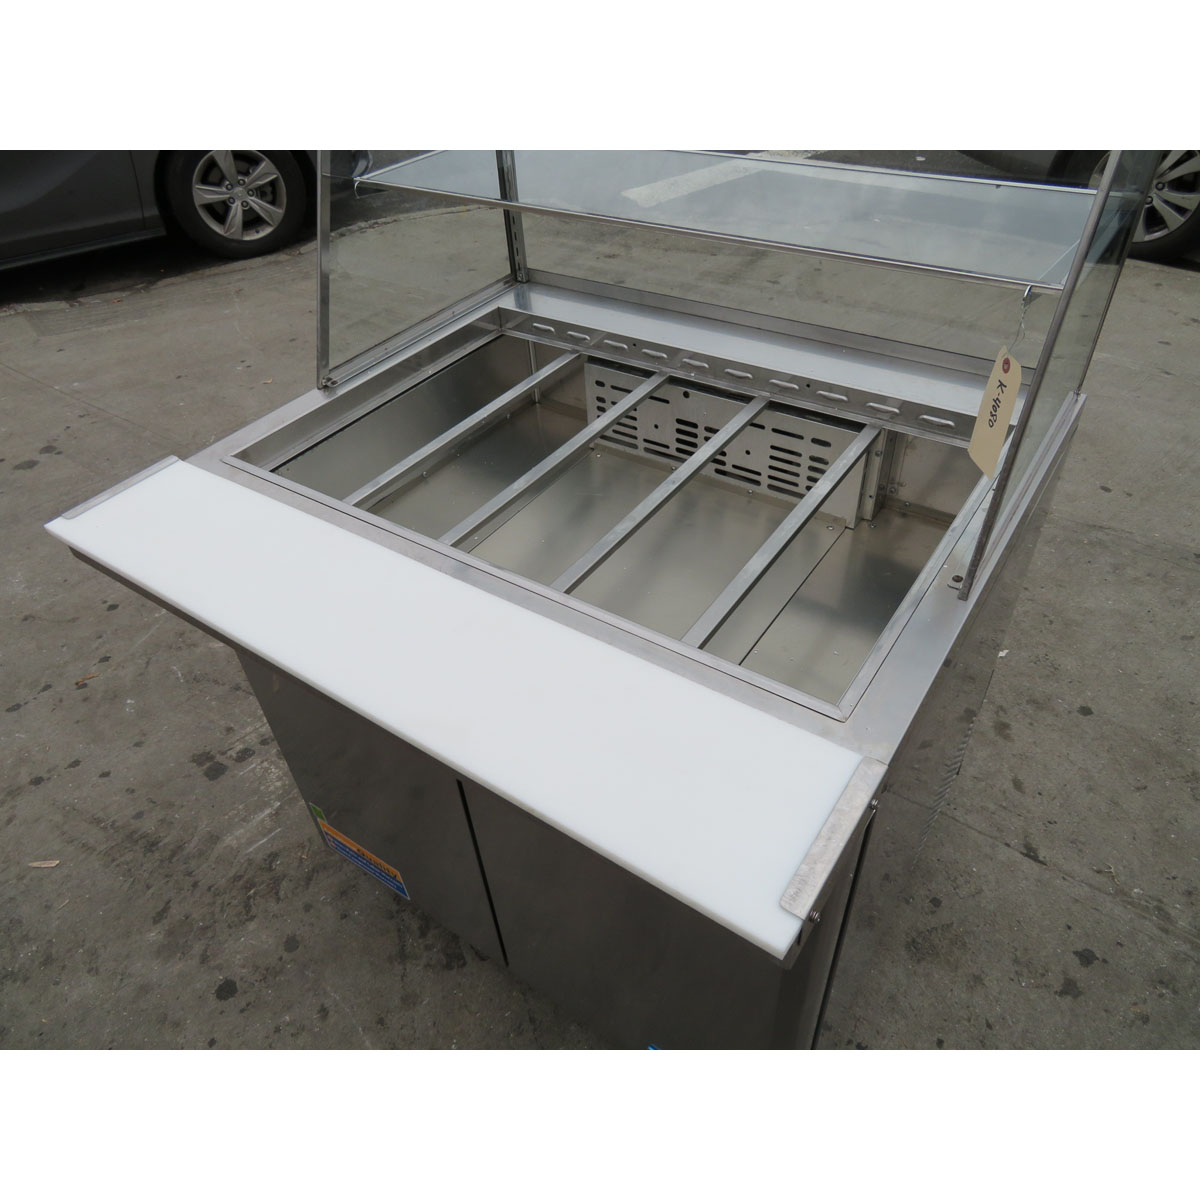 Turbo Air MST-36-15 Refrigerated Sandwich Prep Table 36 Inch, Used Excellent Condition image 1